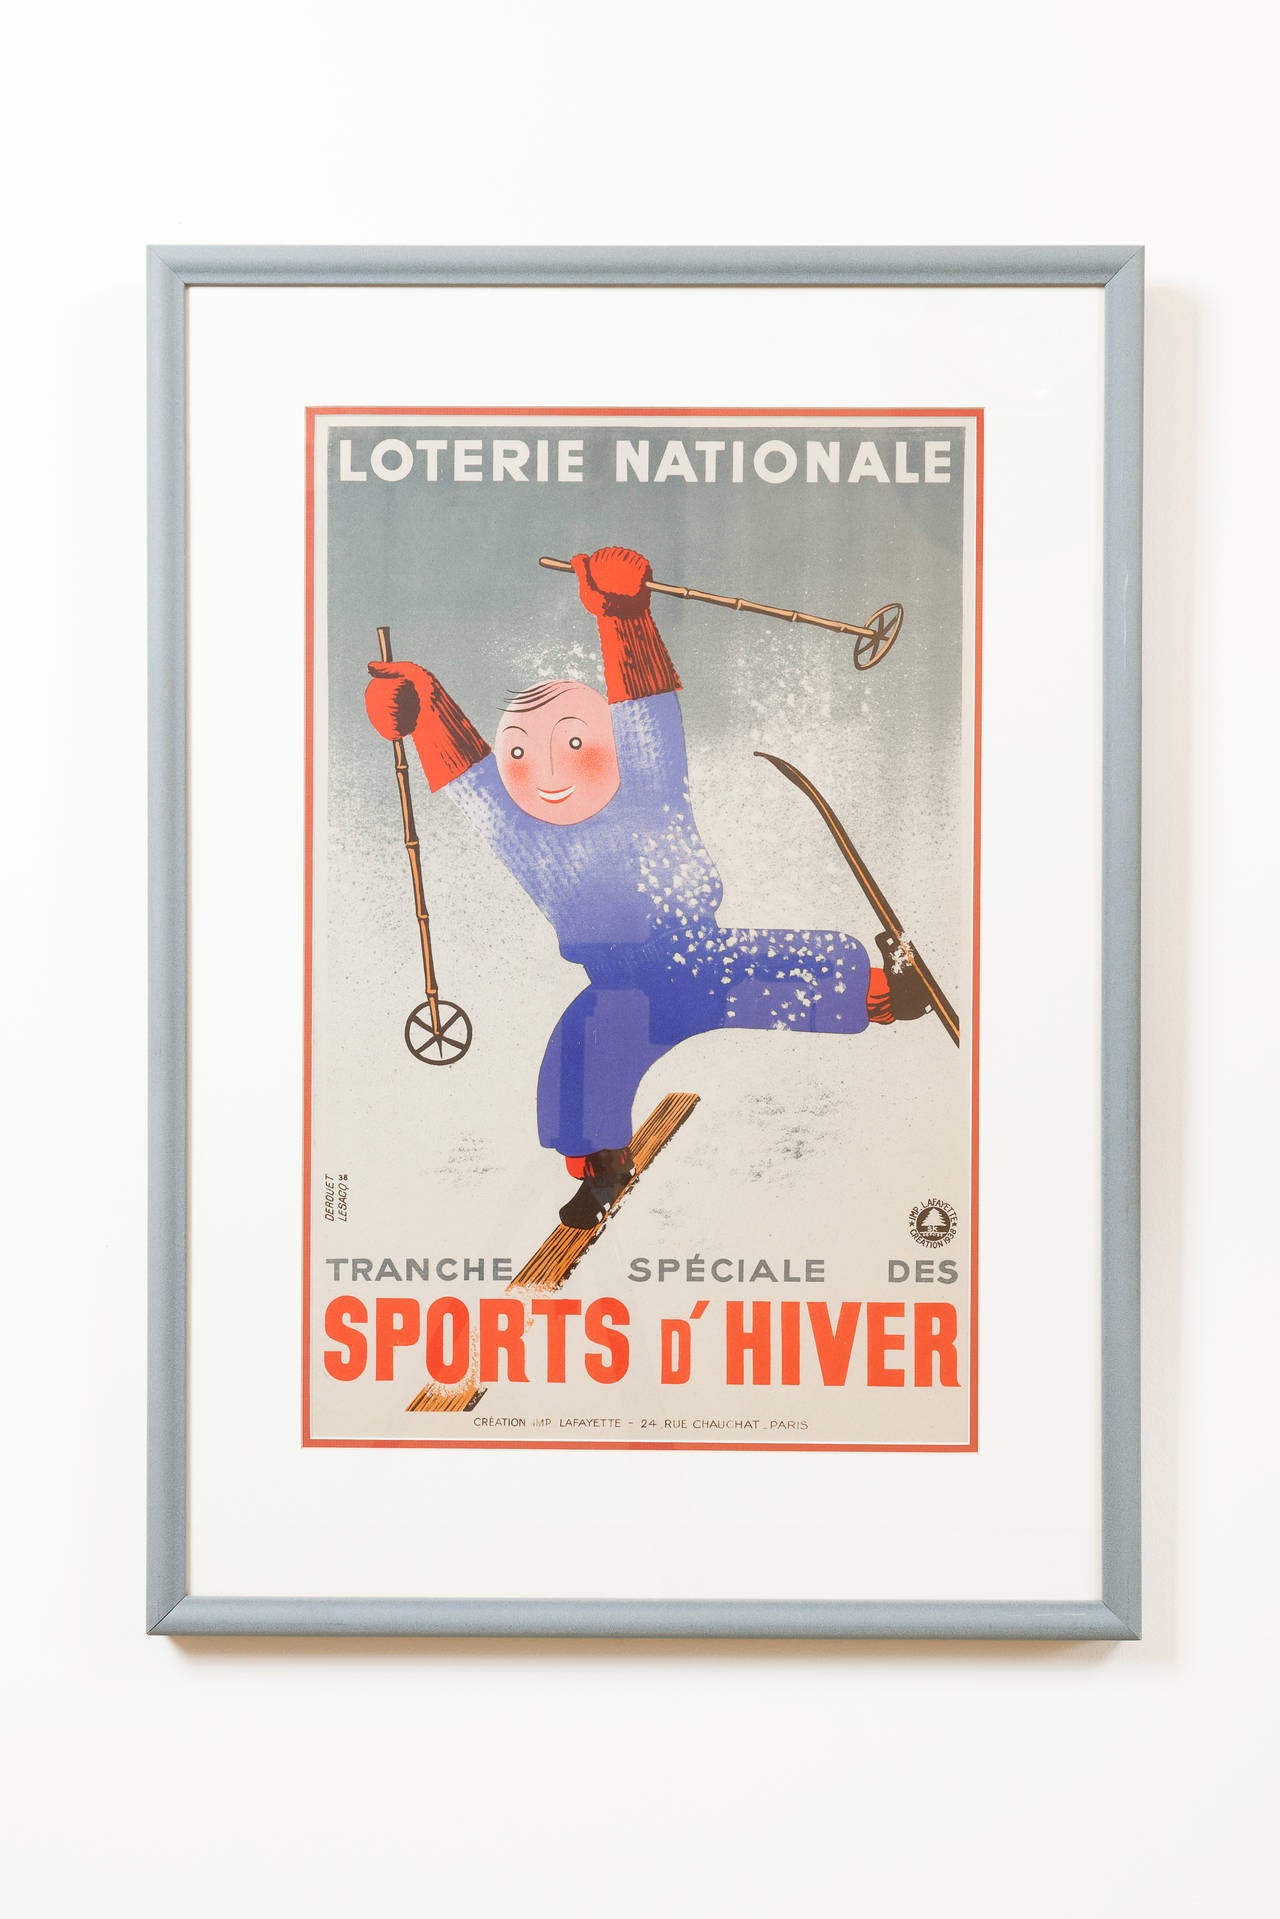 French poster Sports D'Hiver (Winter Sports) by Edgar Derouet (1910-2001) and Charles Lesacq (1909-1940), color lithograph, 1938. Handsomely framed and matted.